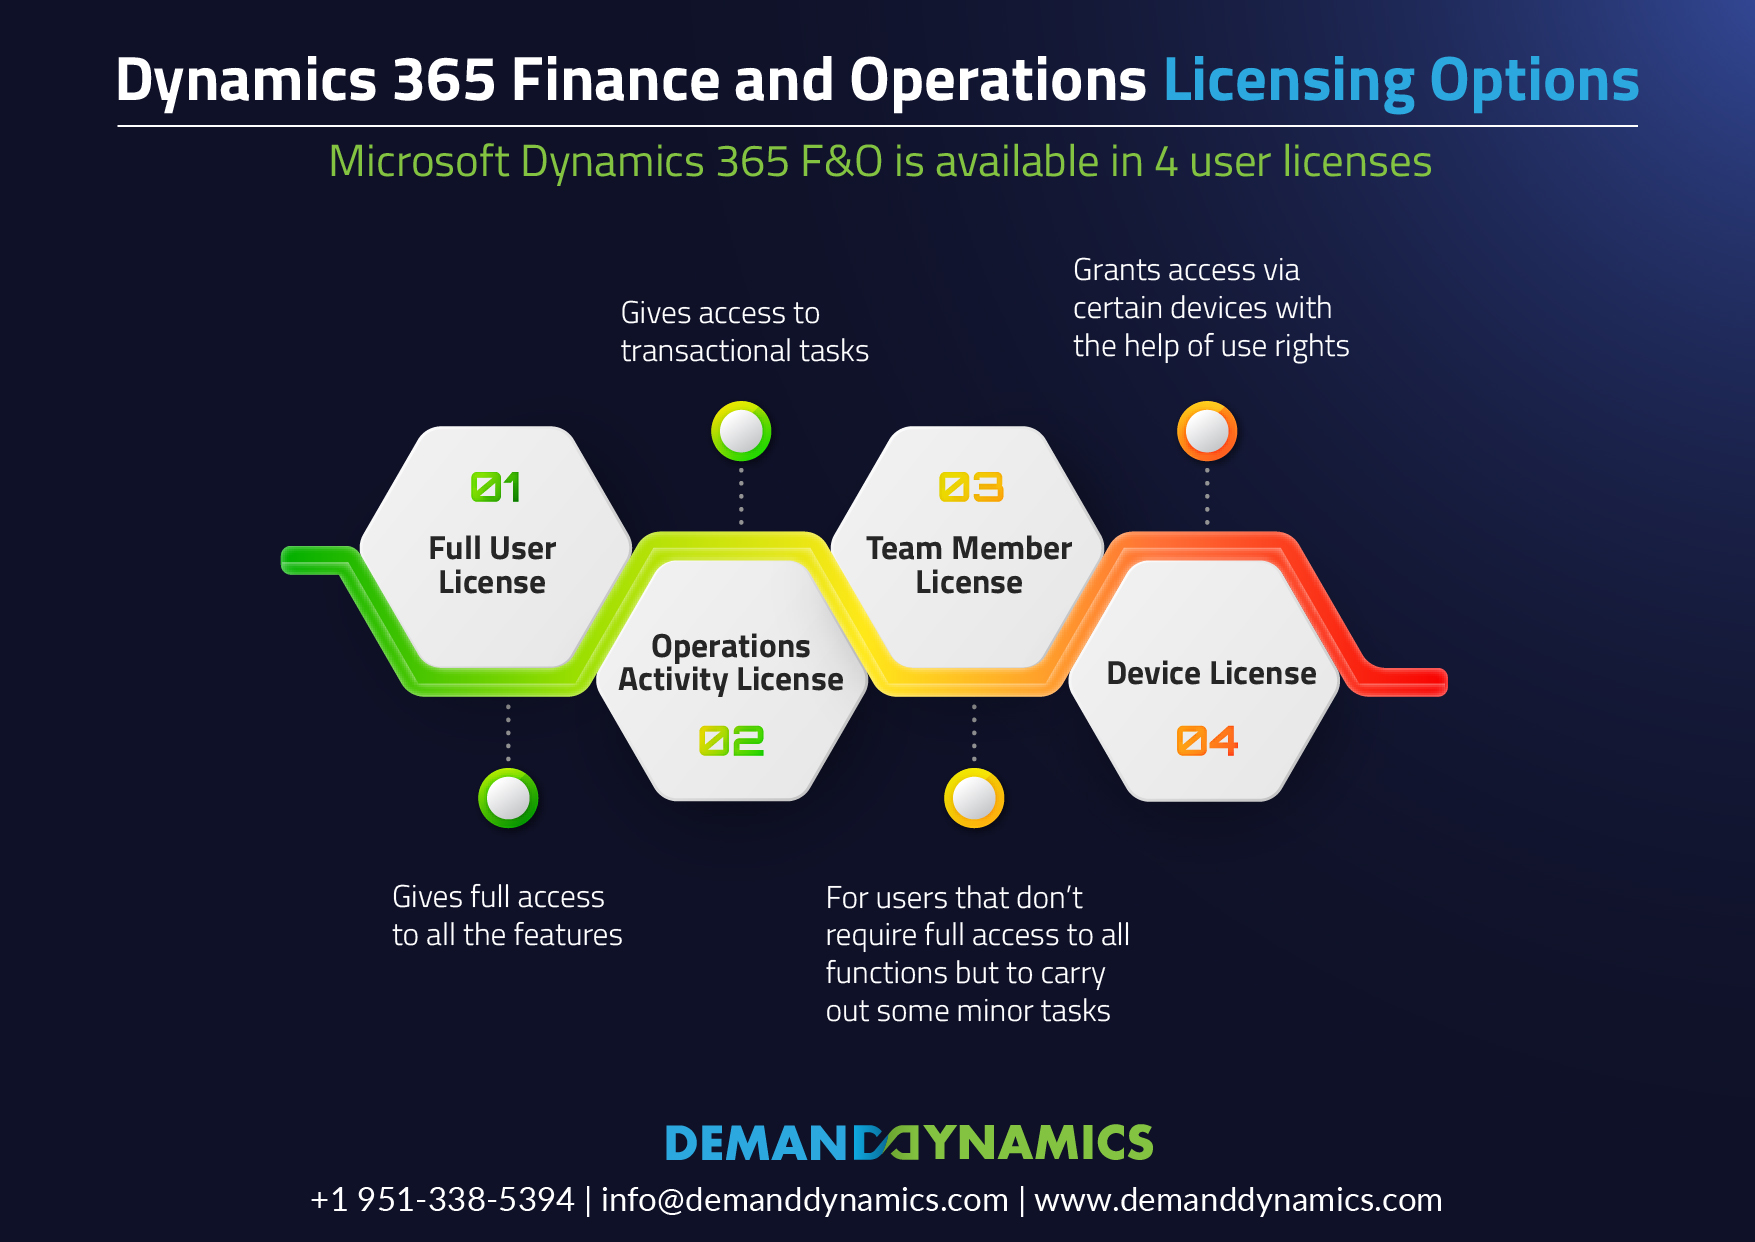 Dynamics 365 Finance and Operations Licensing Options